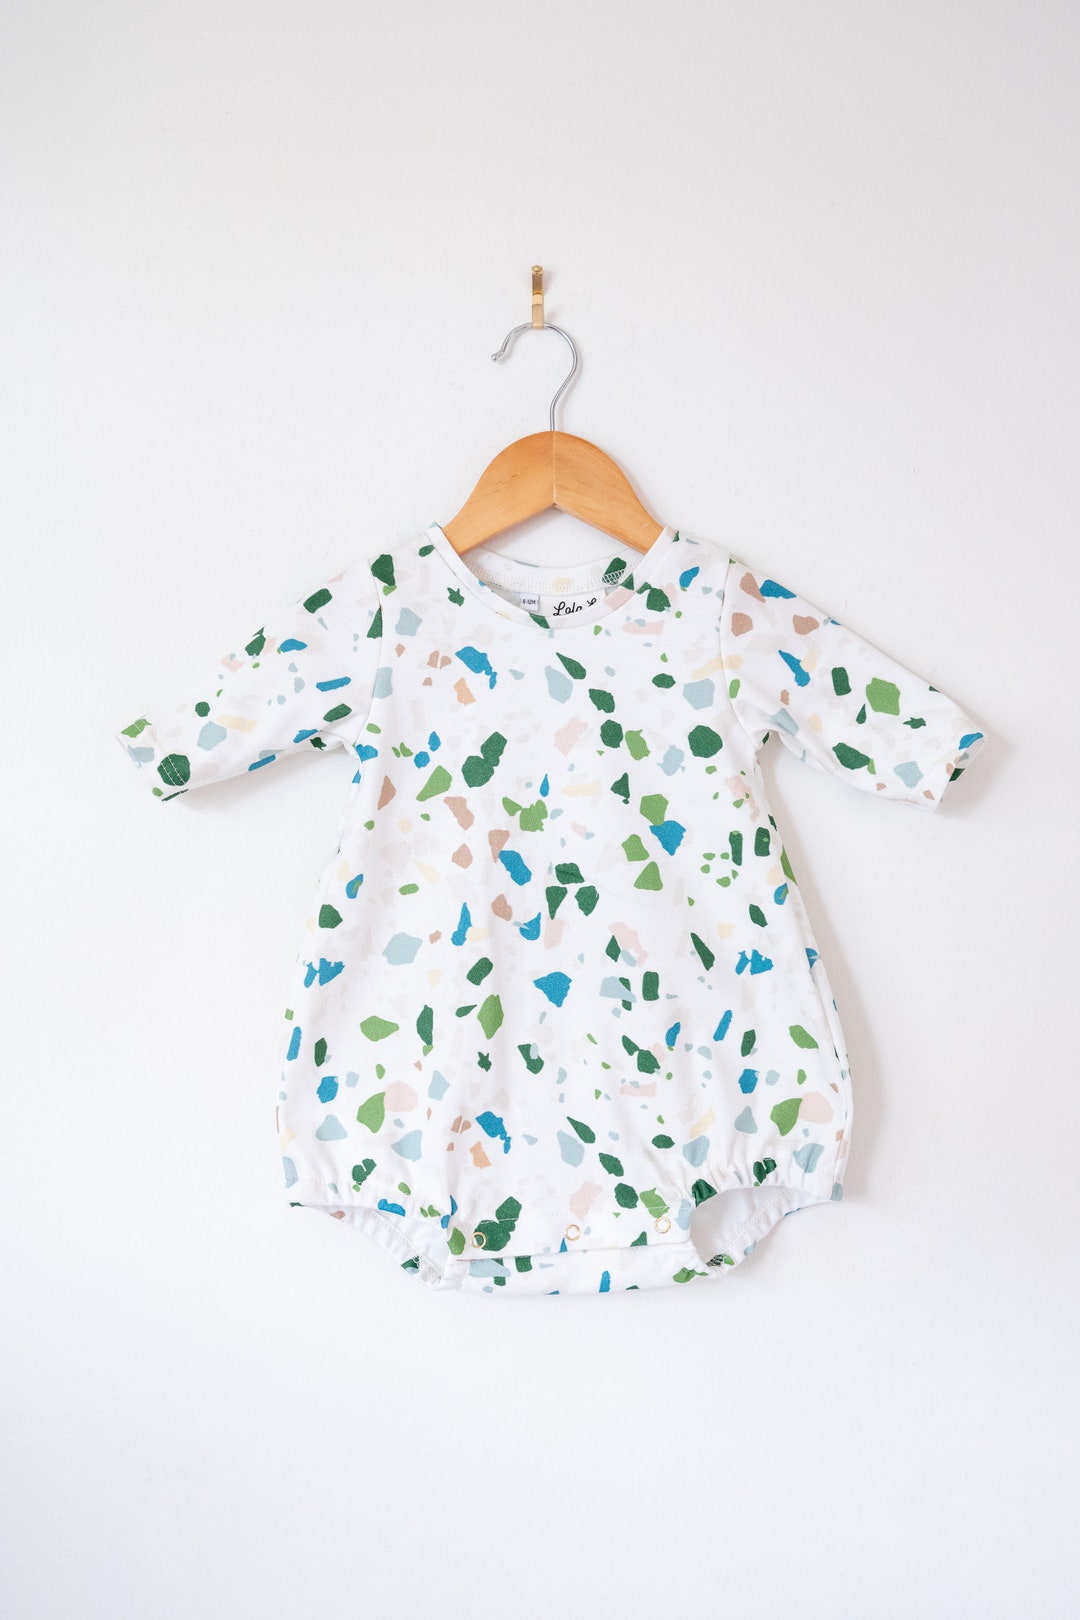 Terrazzo Bubble Romper / Baby Girl Clothes / Organic Baby - Etsy